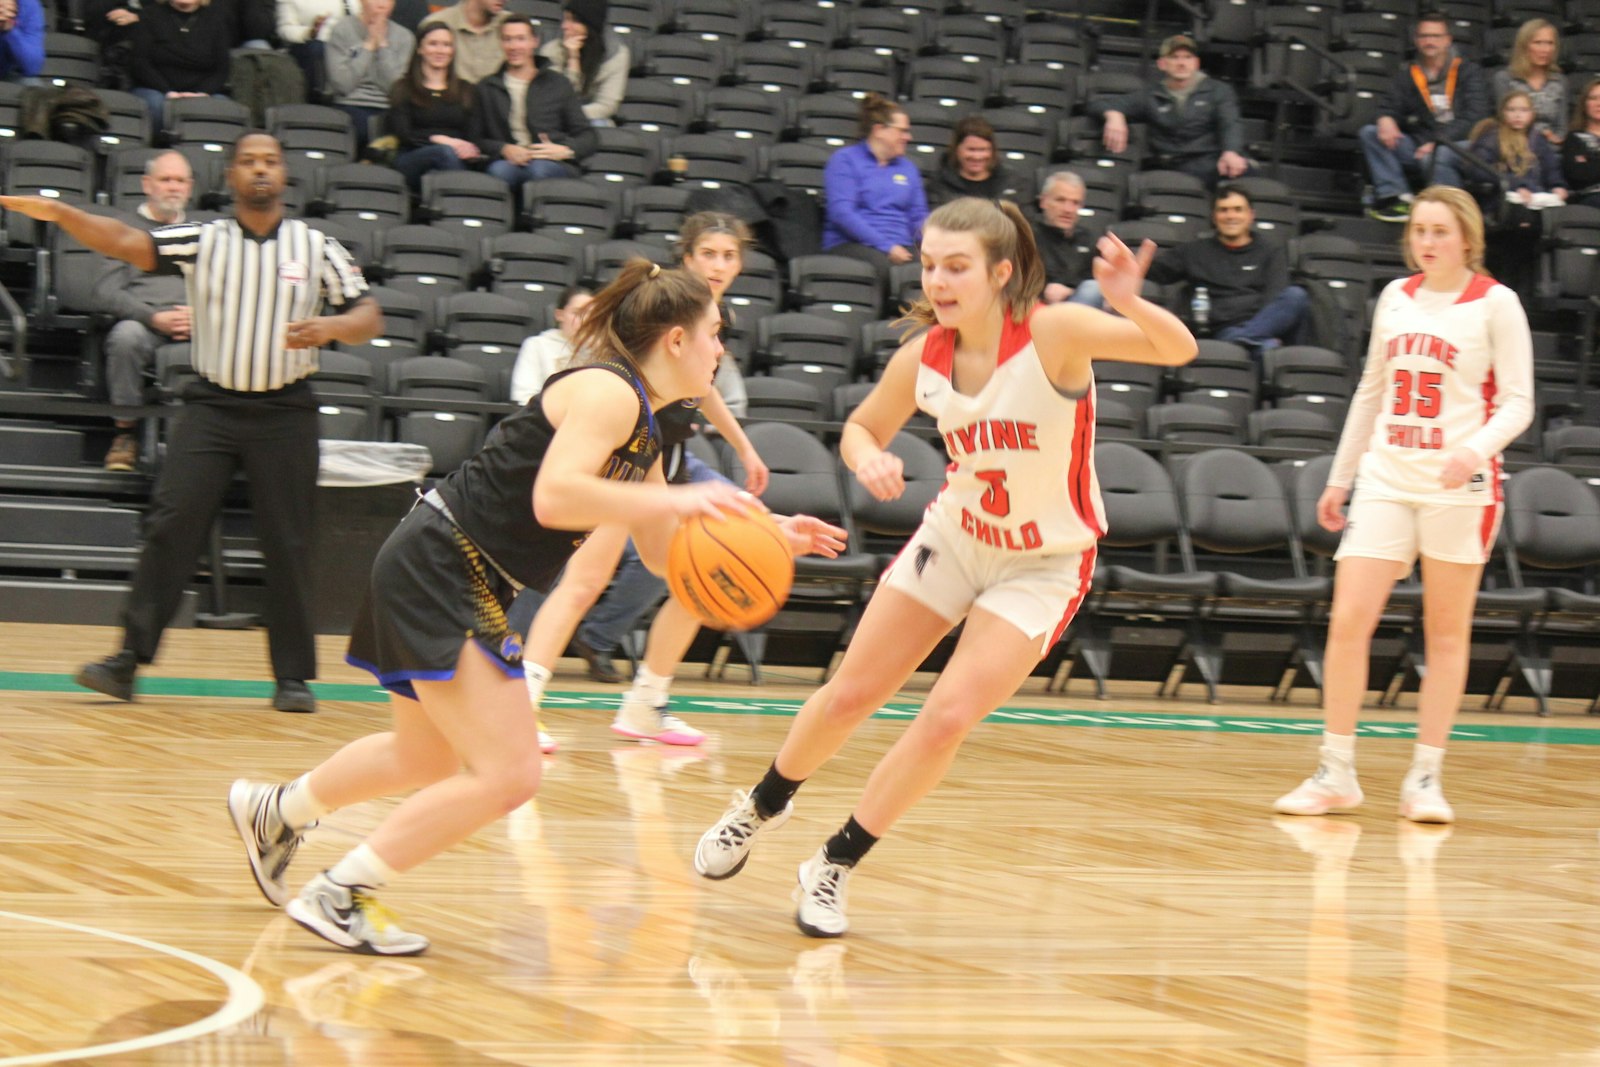 Marian point guard Anna Herberholz brings the ball up court against Divine Child’s Anna Bidolli. Herberholz scored 22 points — including all of her team’s 11 in the first quarter — pacing the Mustangs to a 44-38 win.